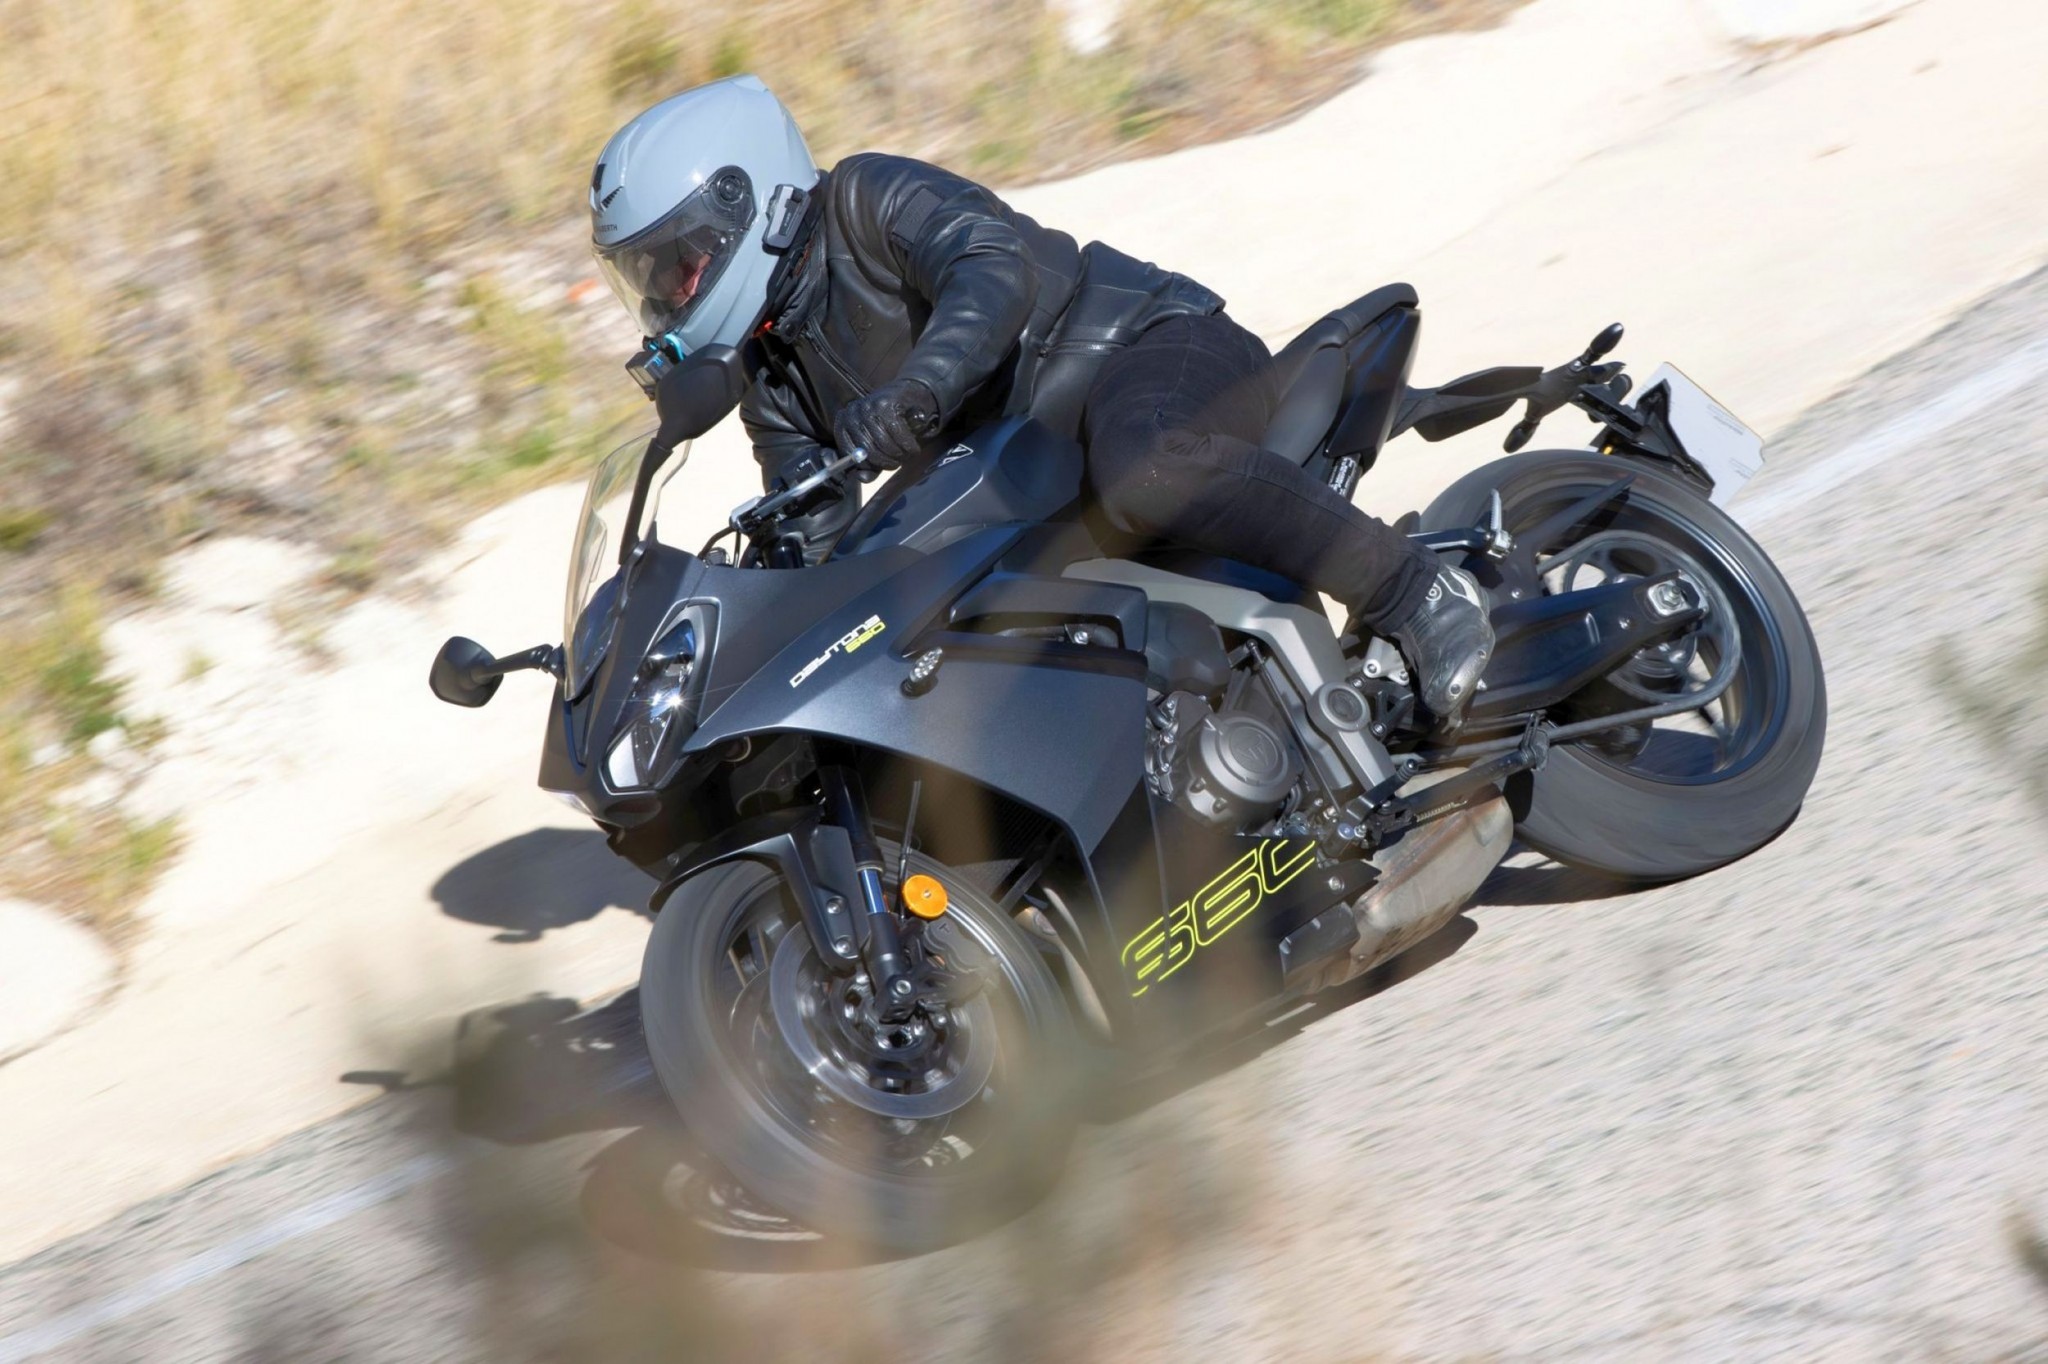 Schuberth S3 sport touring helmet in the test - Image 7